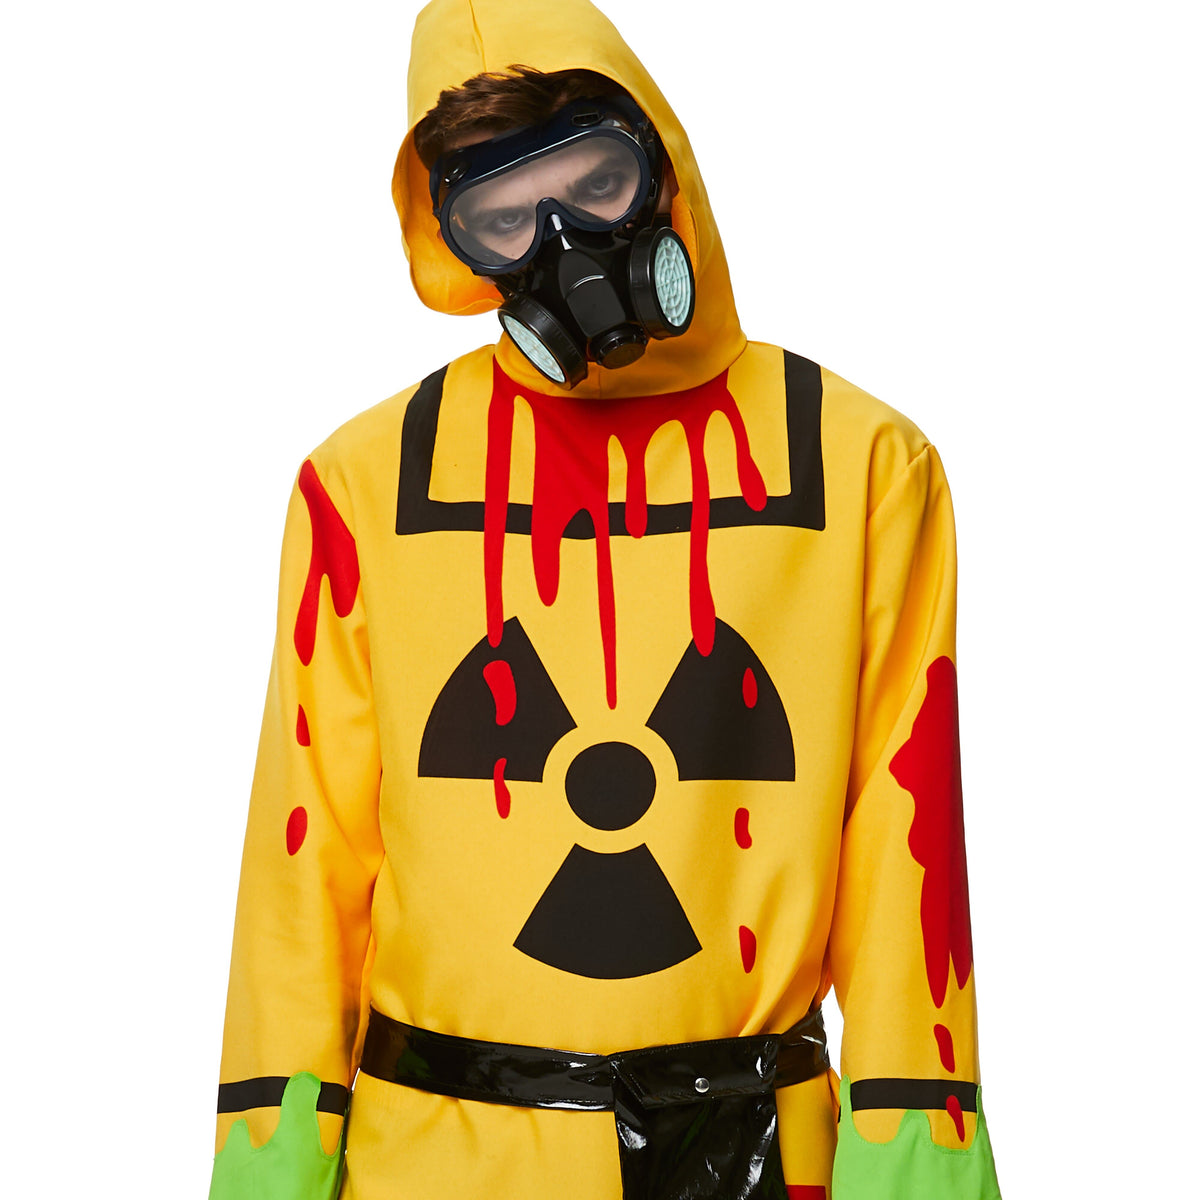 Toxic Biosuit Tainted Radiation Worker Deluxe Adult Costume